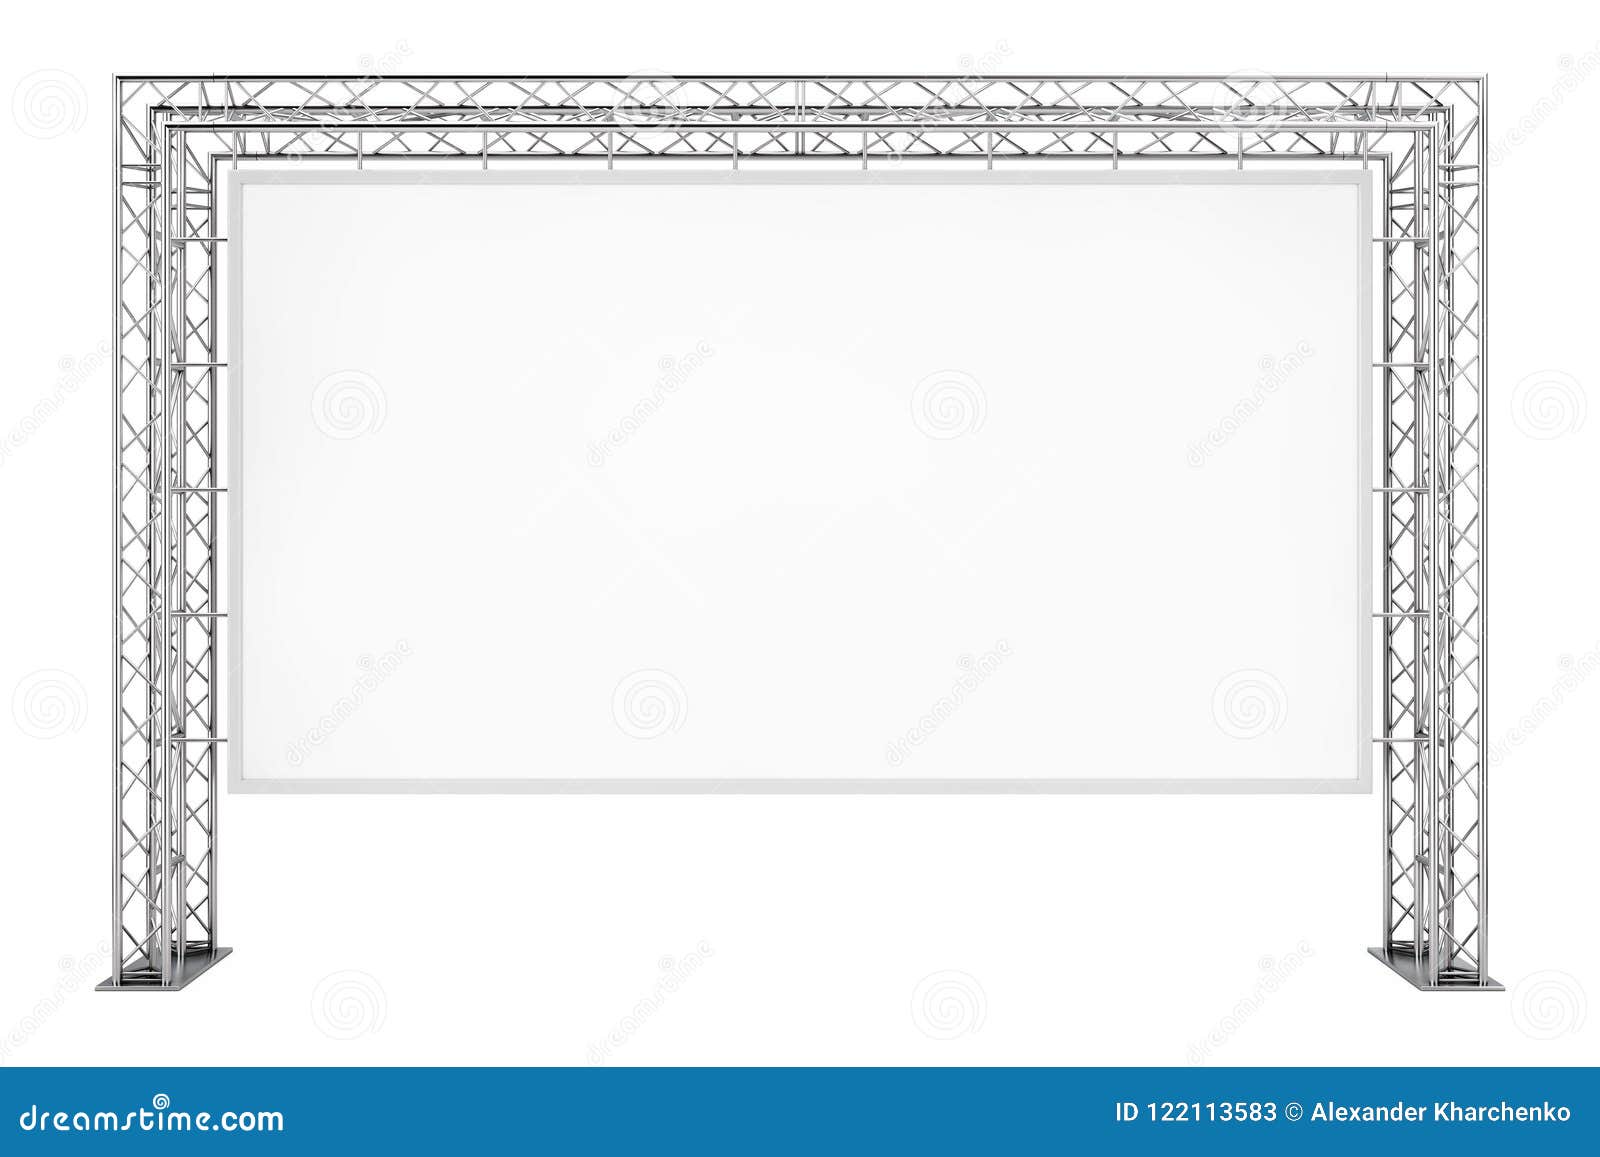 blank advertising outdoor banner on metal truss construction system. 3d rendering